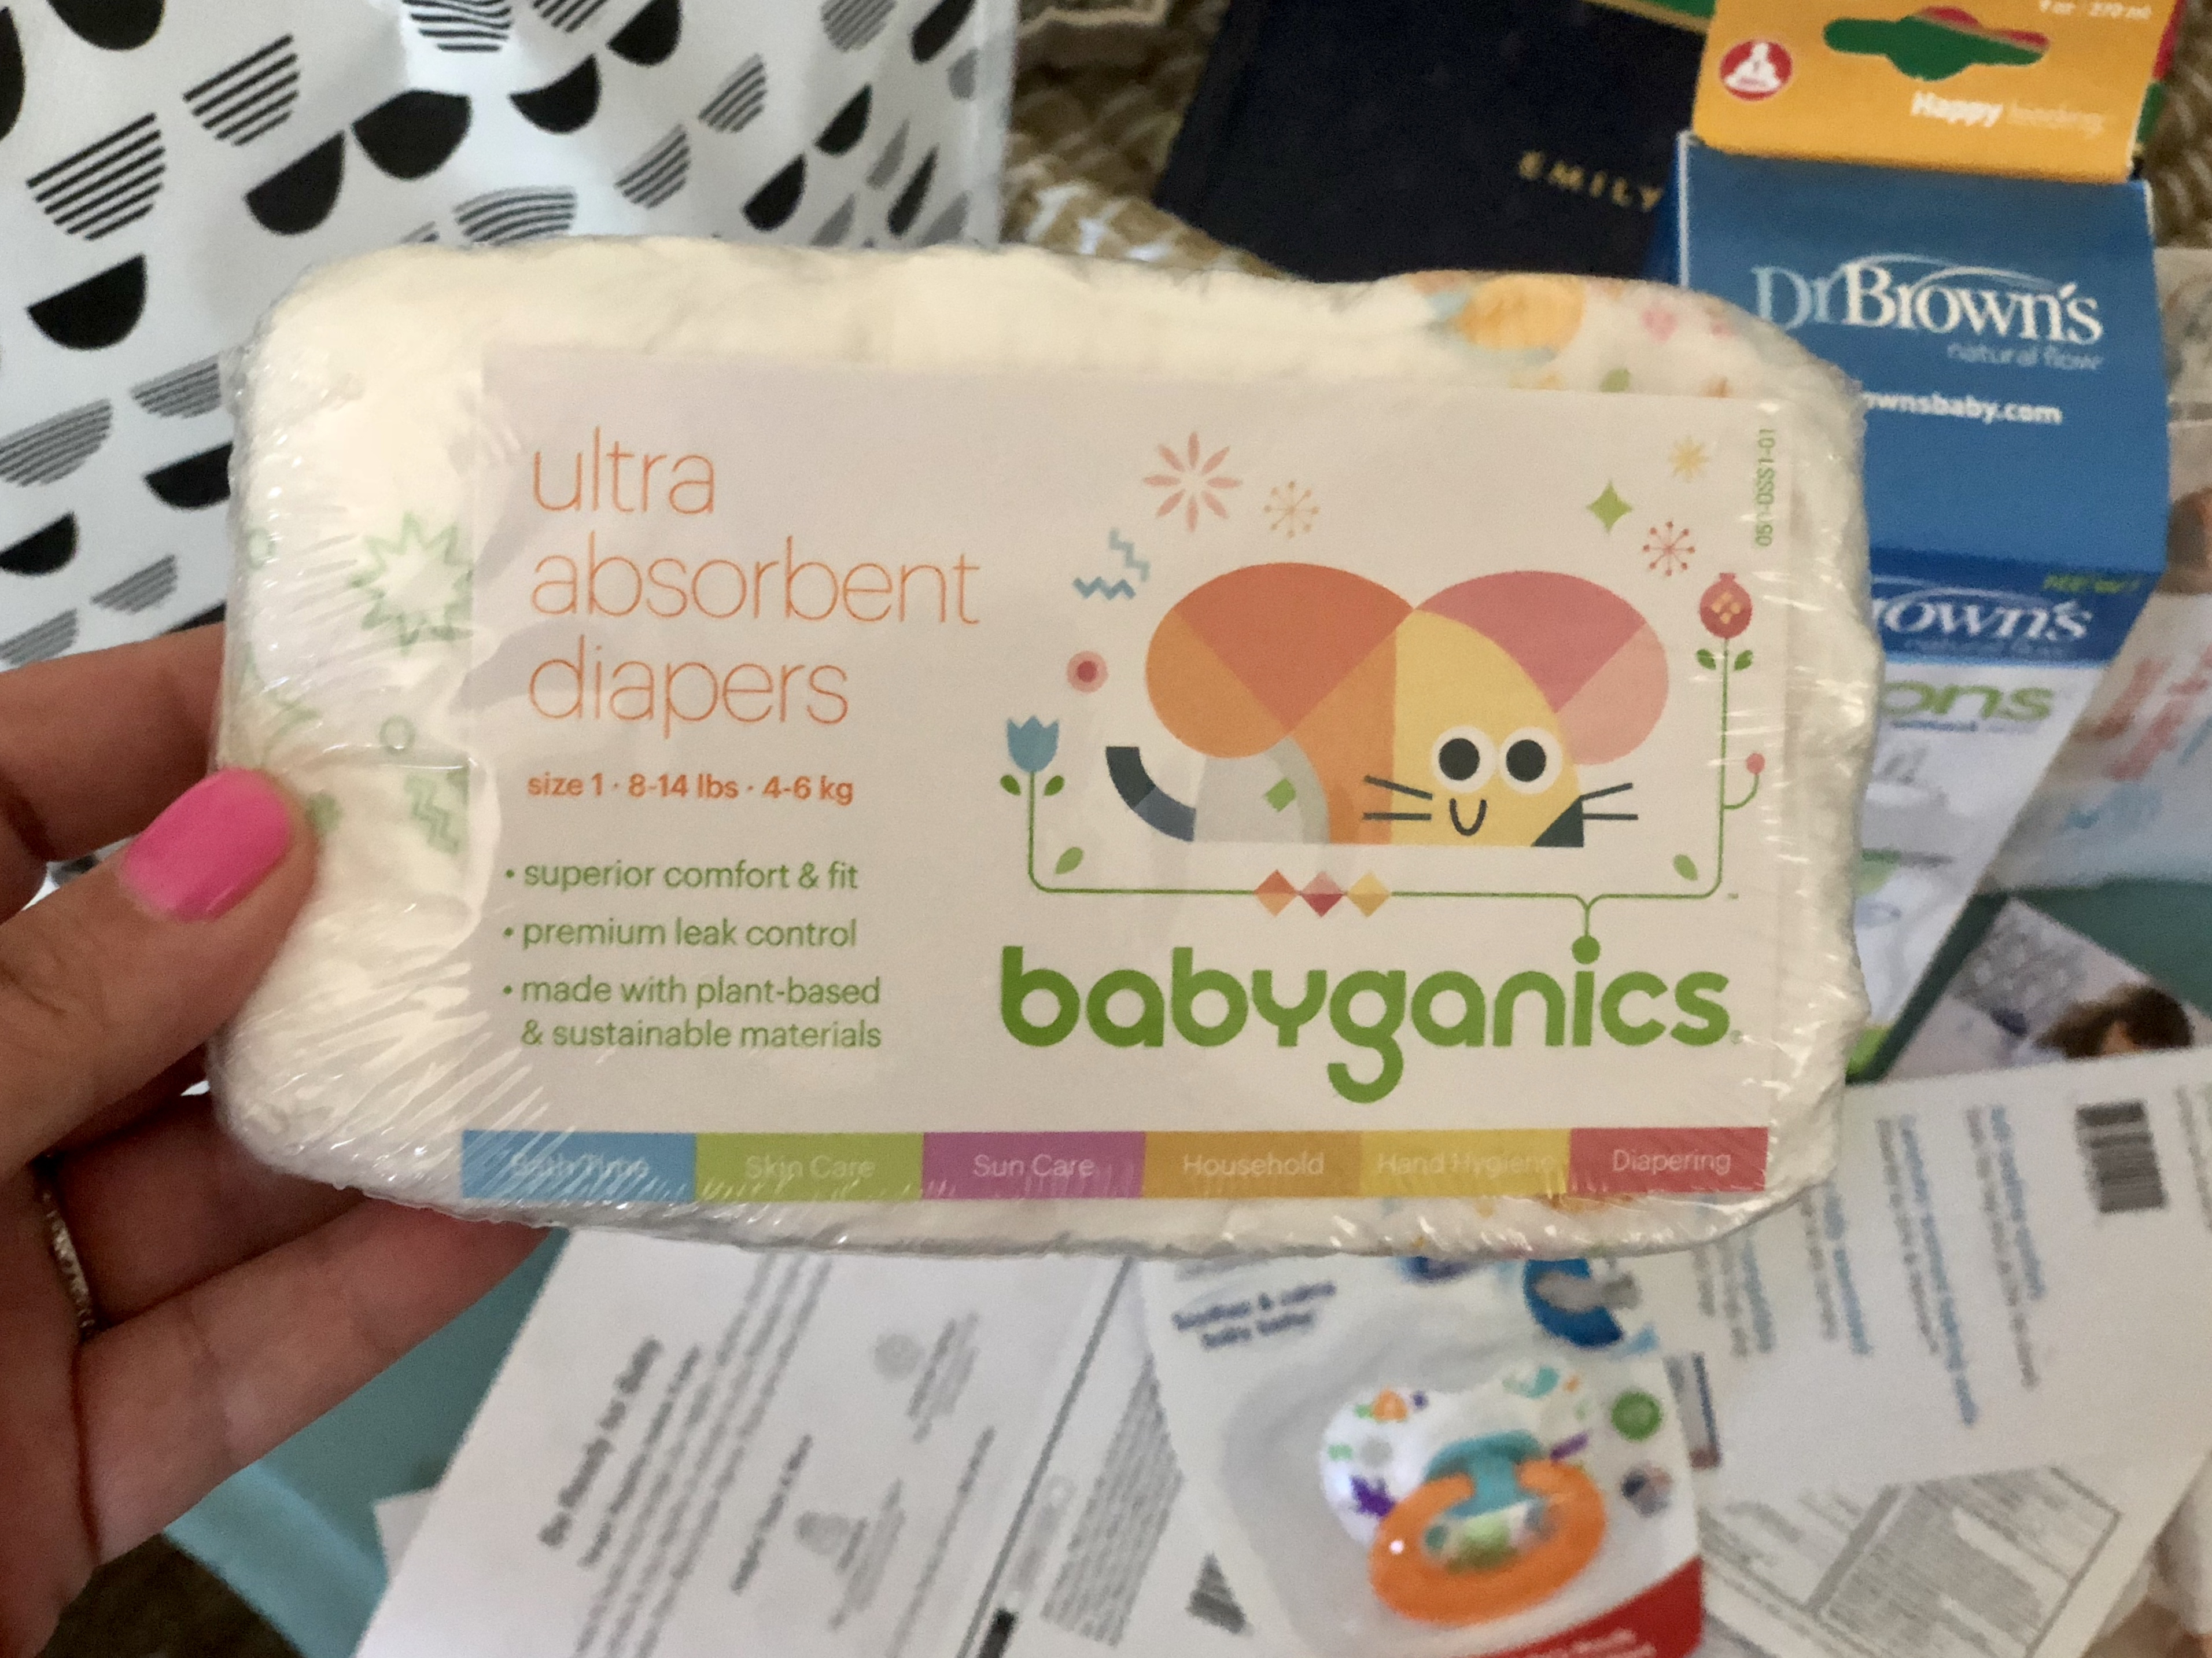 target baby registry bag with free gift coupons and samples - usually includes a diaper sample